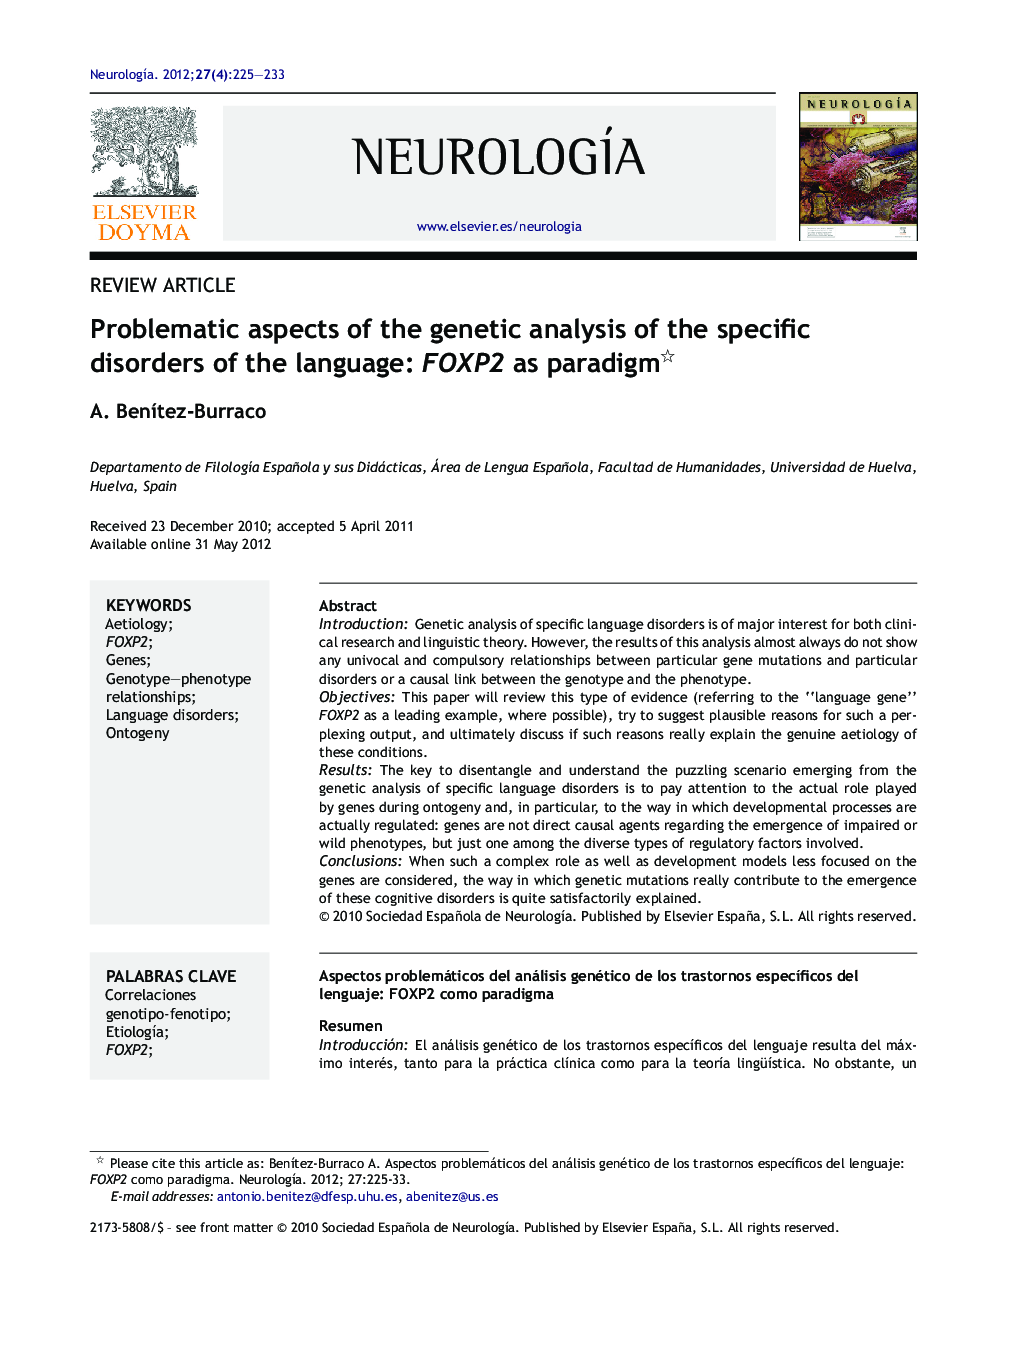 Problematic aspects of the genetic analysis of the specific disorders of the language: FOXP2 as paradigm